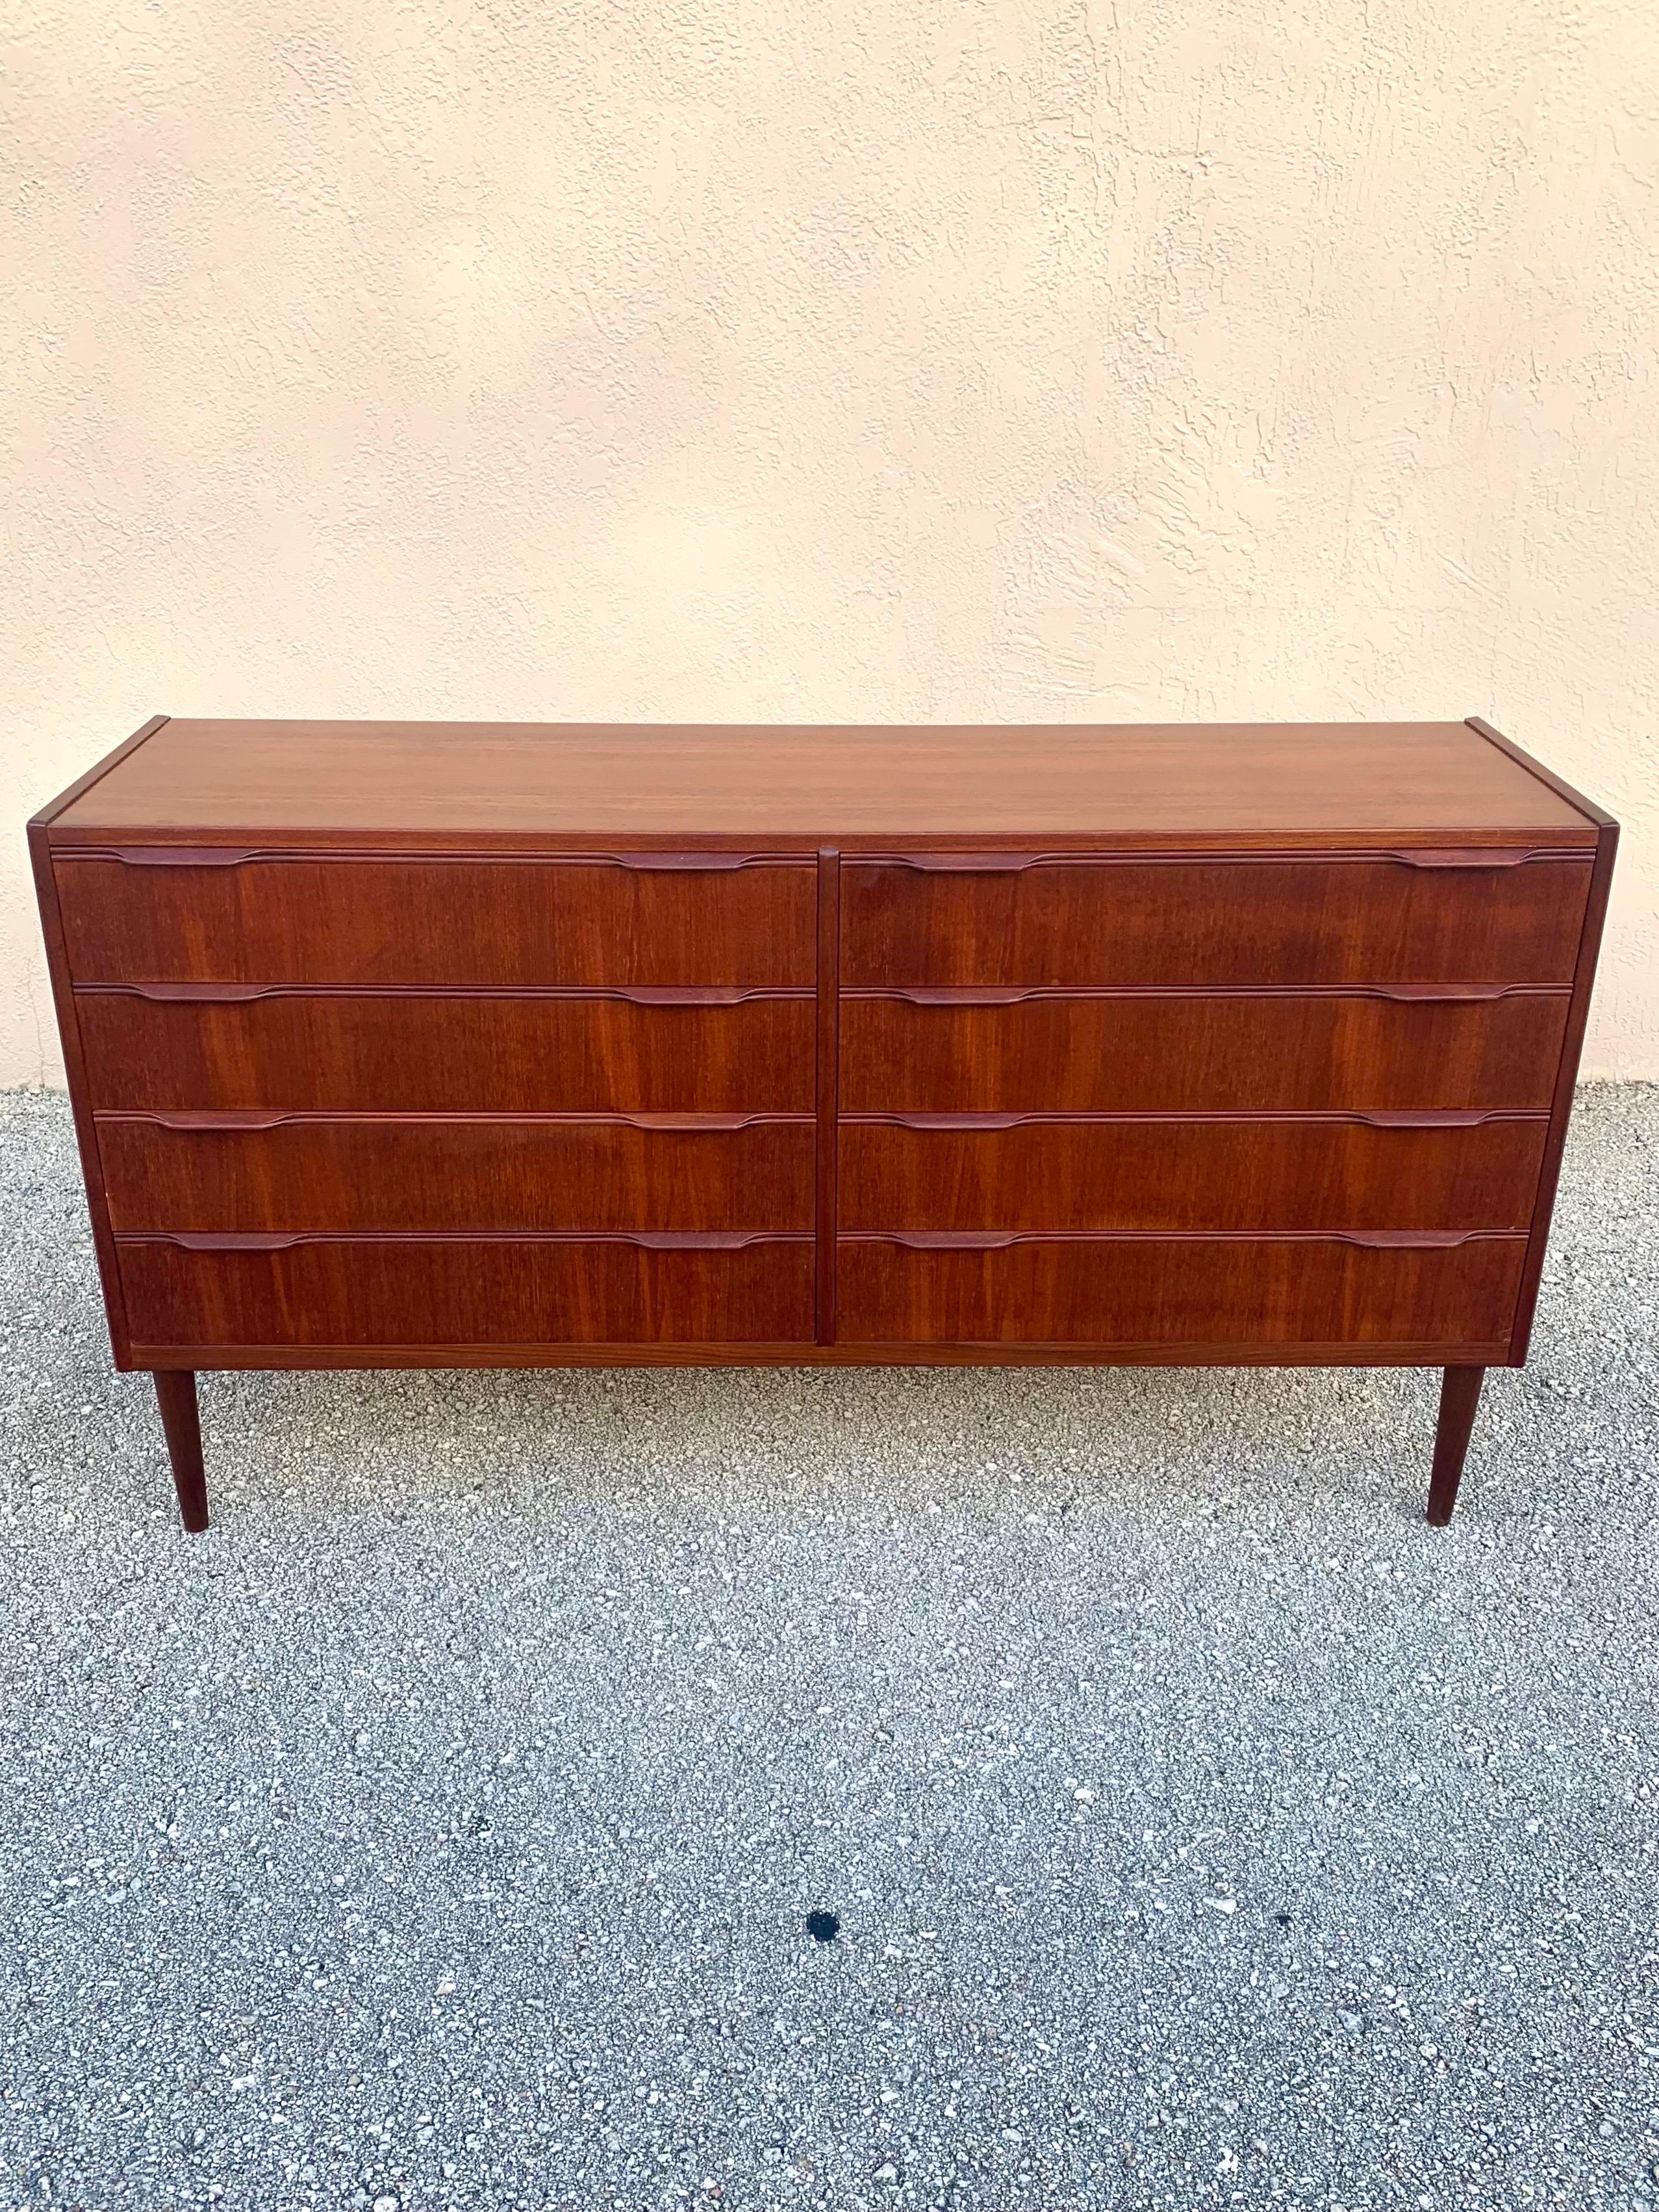 8 drawer teak Double dresser. Made in Denmark in the 1960s. Gorgeous veneer showing the lovely grain of the teak. Exceptionally carved solid teak drawer pulls and details. Unsure if ever refinished. The color looks as if it is the original finish.